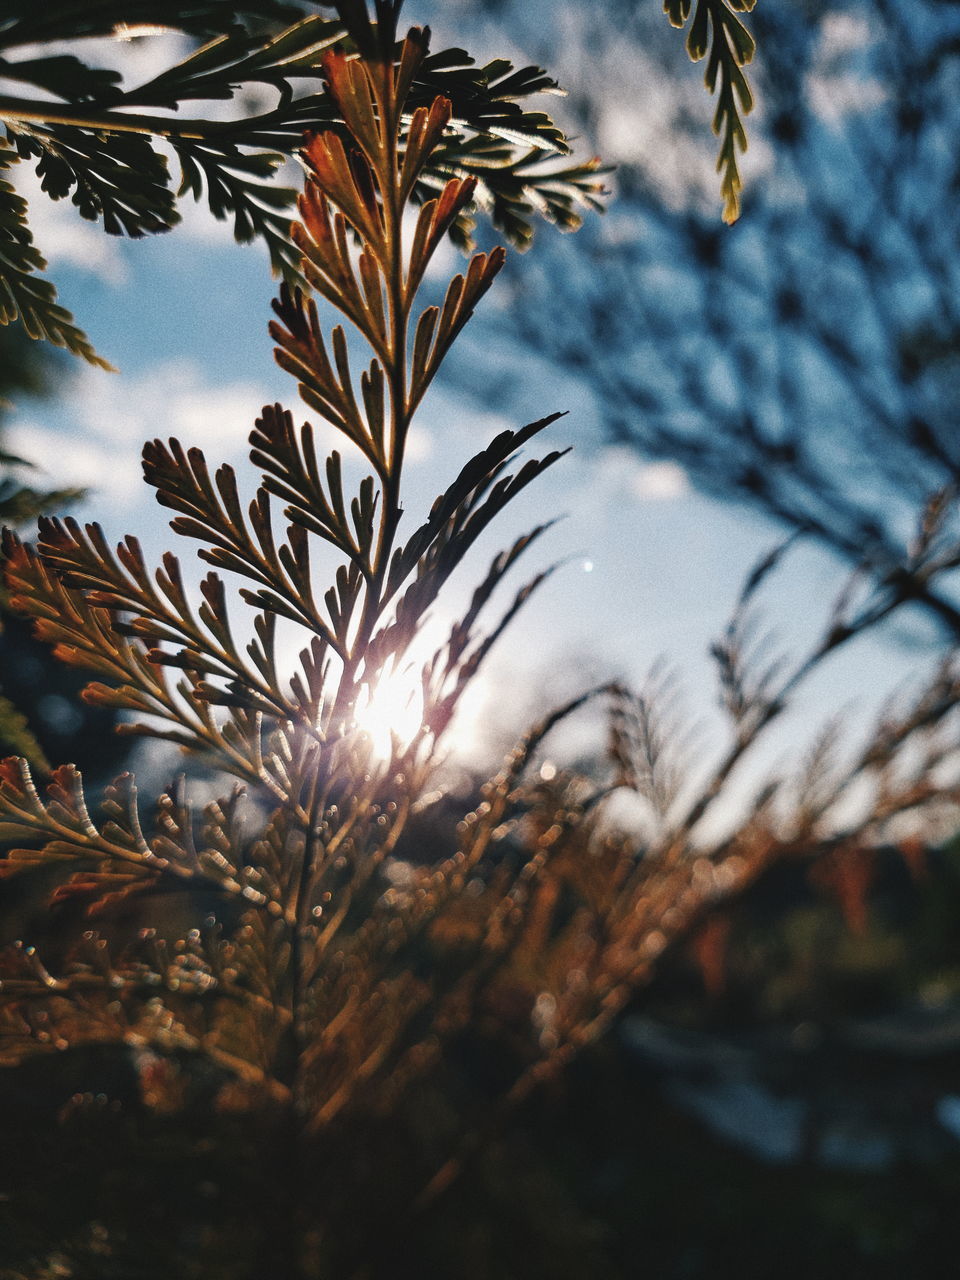 plant, growth, beauty in nature, nature, close-up, sky, sunlight, no people, focus on foreground, selective focus, tree, sunset, outdoors, sun, leaf, day, lens flare, plant part, tranquility, back lit